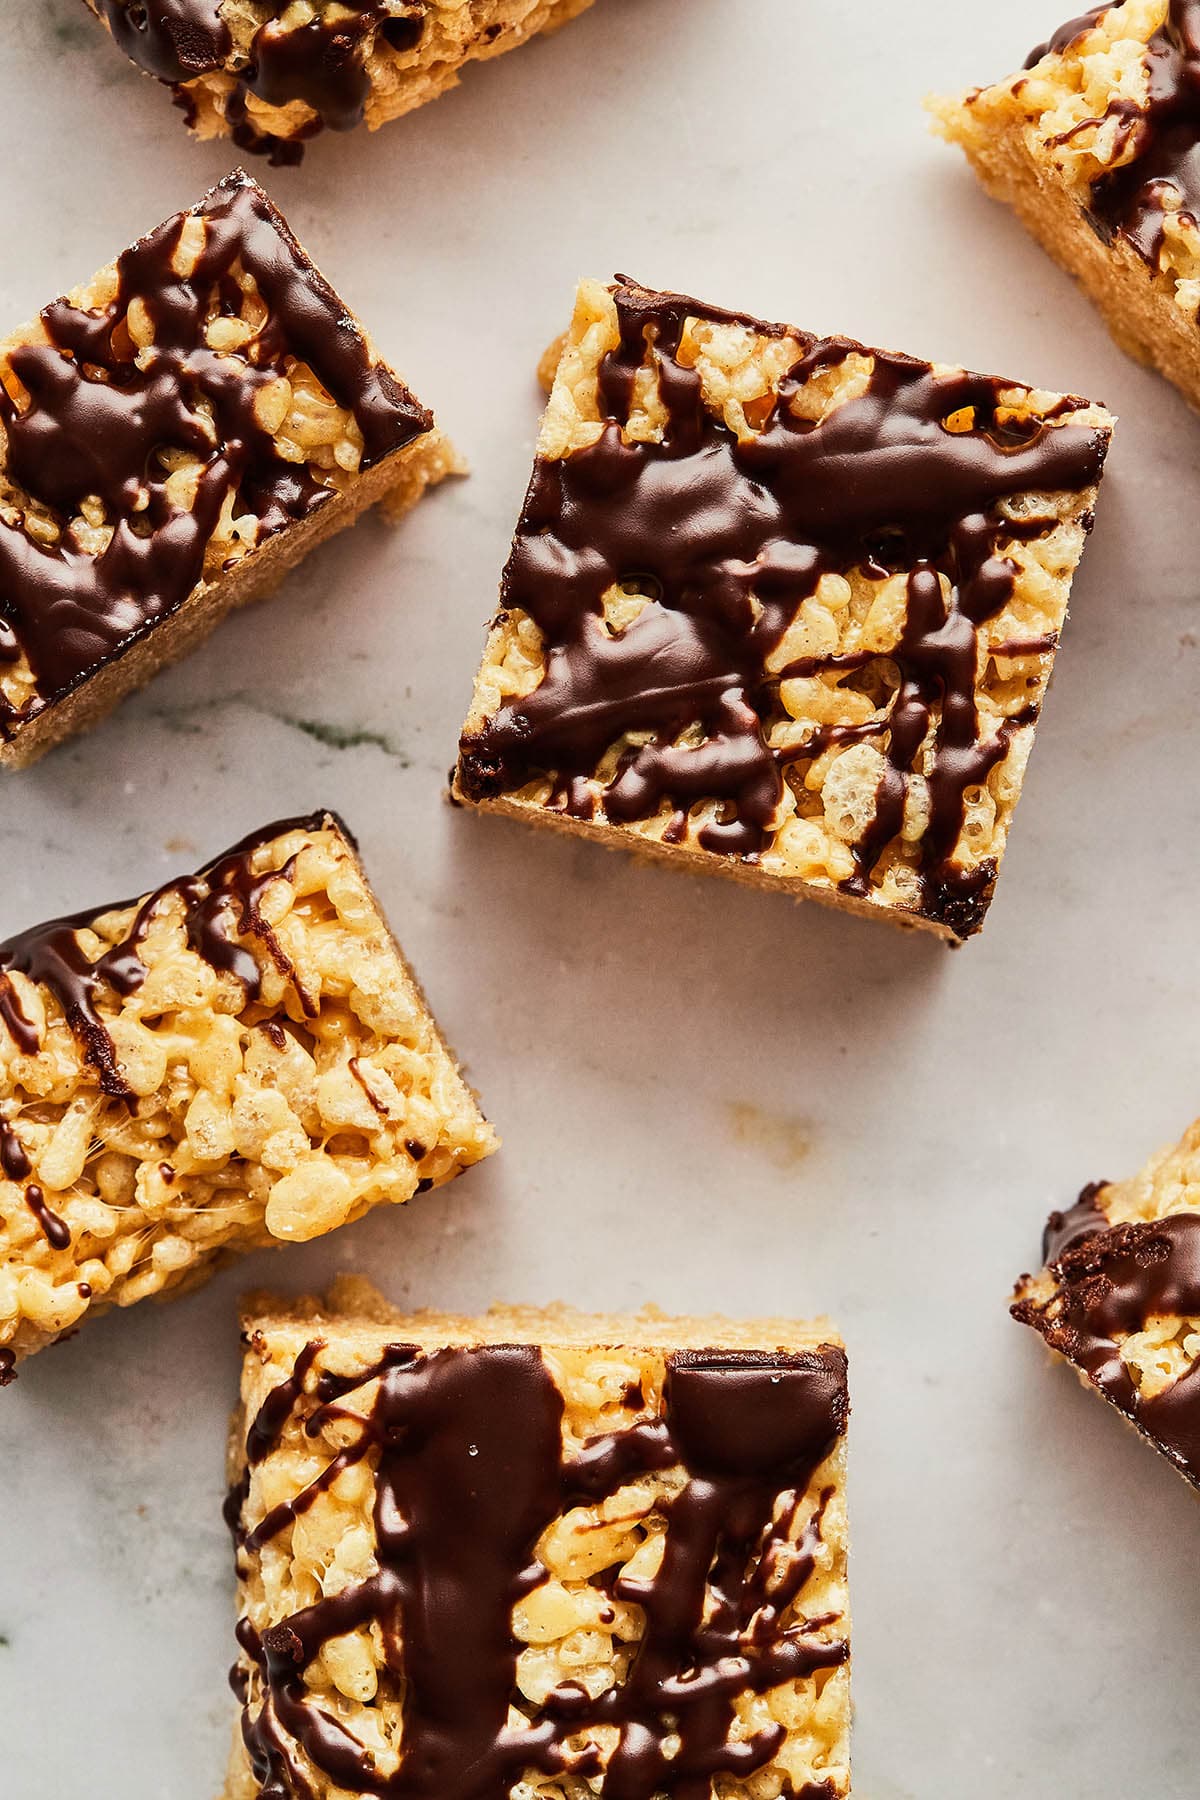 Overhead image of peanut butter Rice Krispie treats on a marble surface.